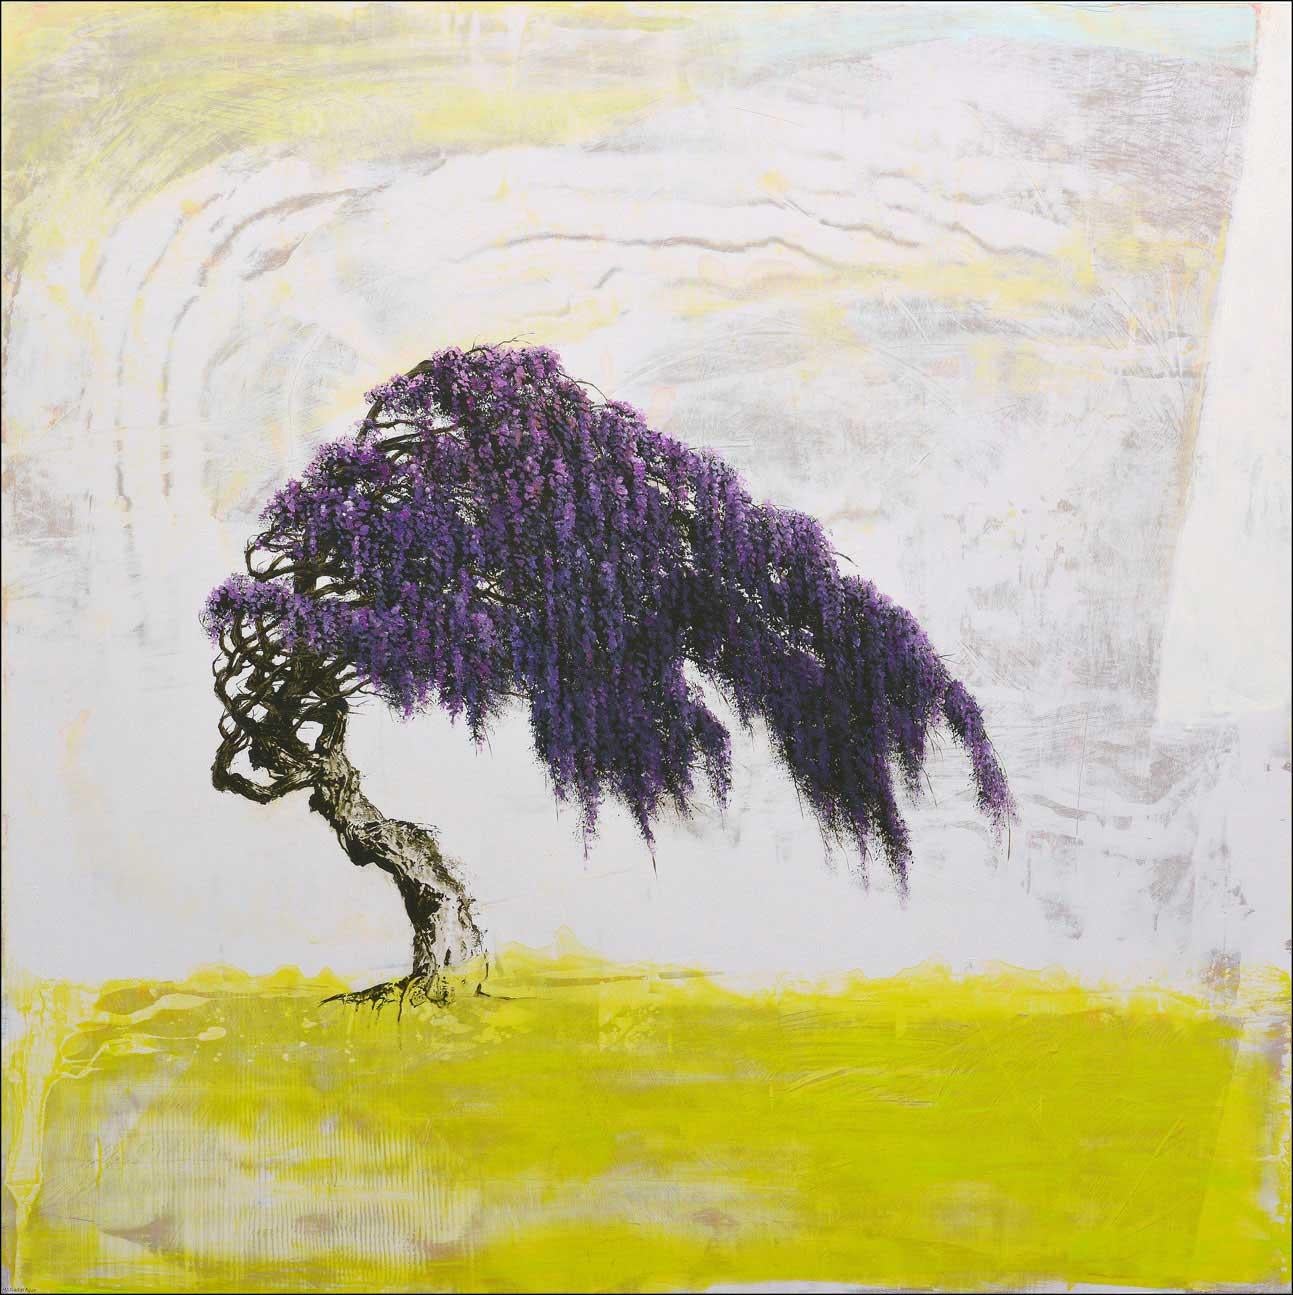 Robert Marchessault Landscape Painting - 'Wisteria', abstract realist flowering tree painting with purple, chartreuse